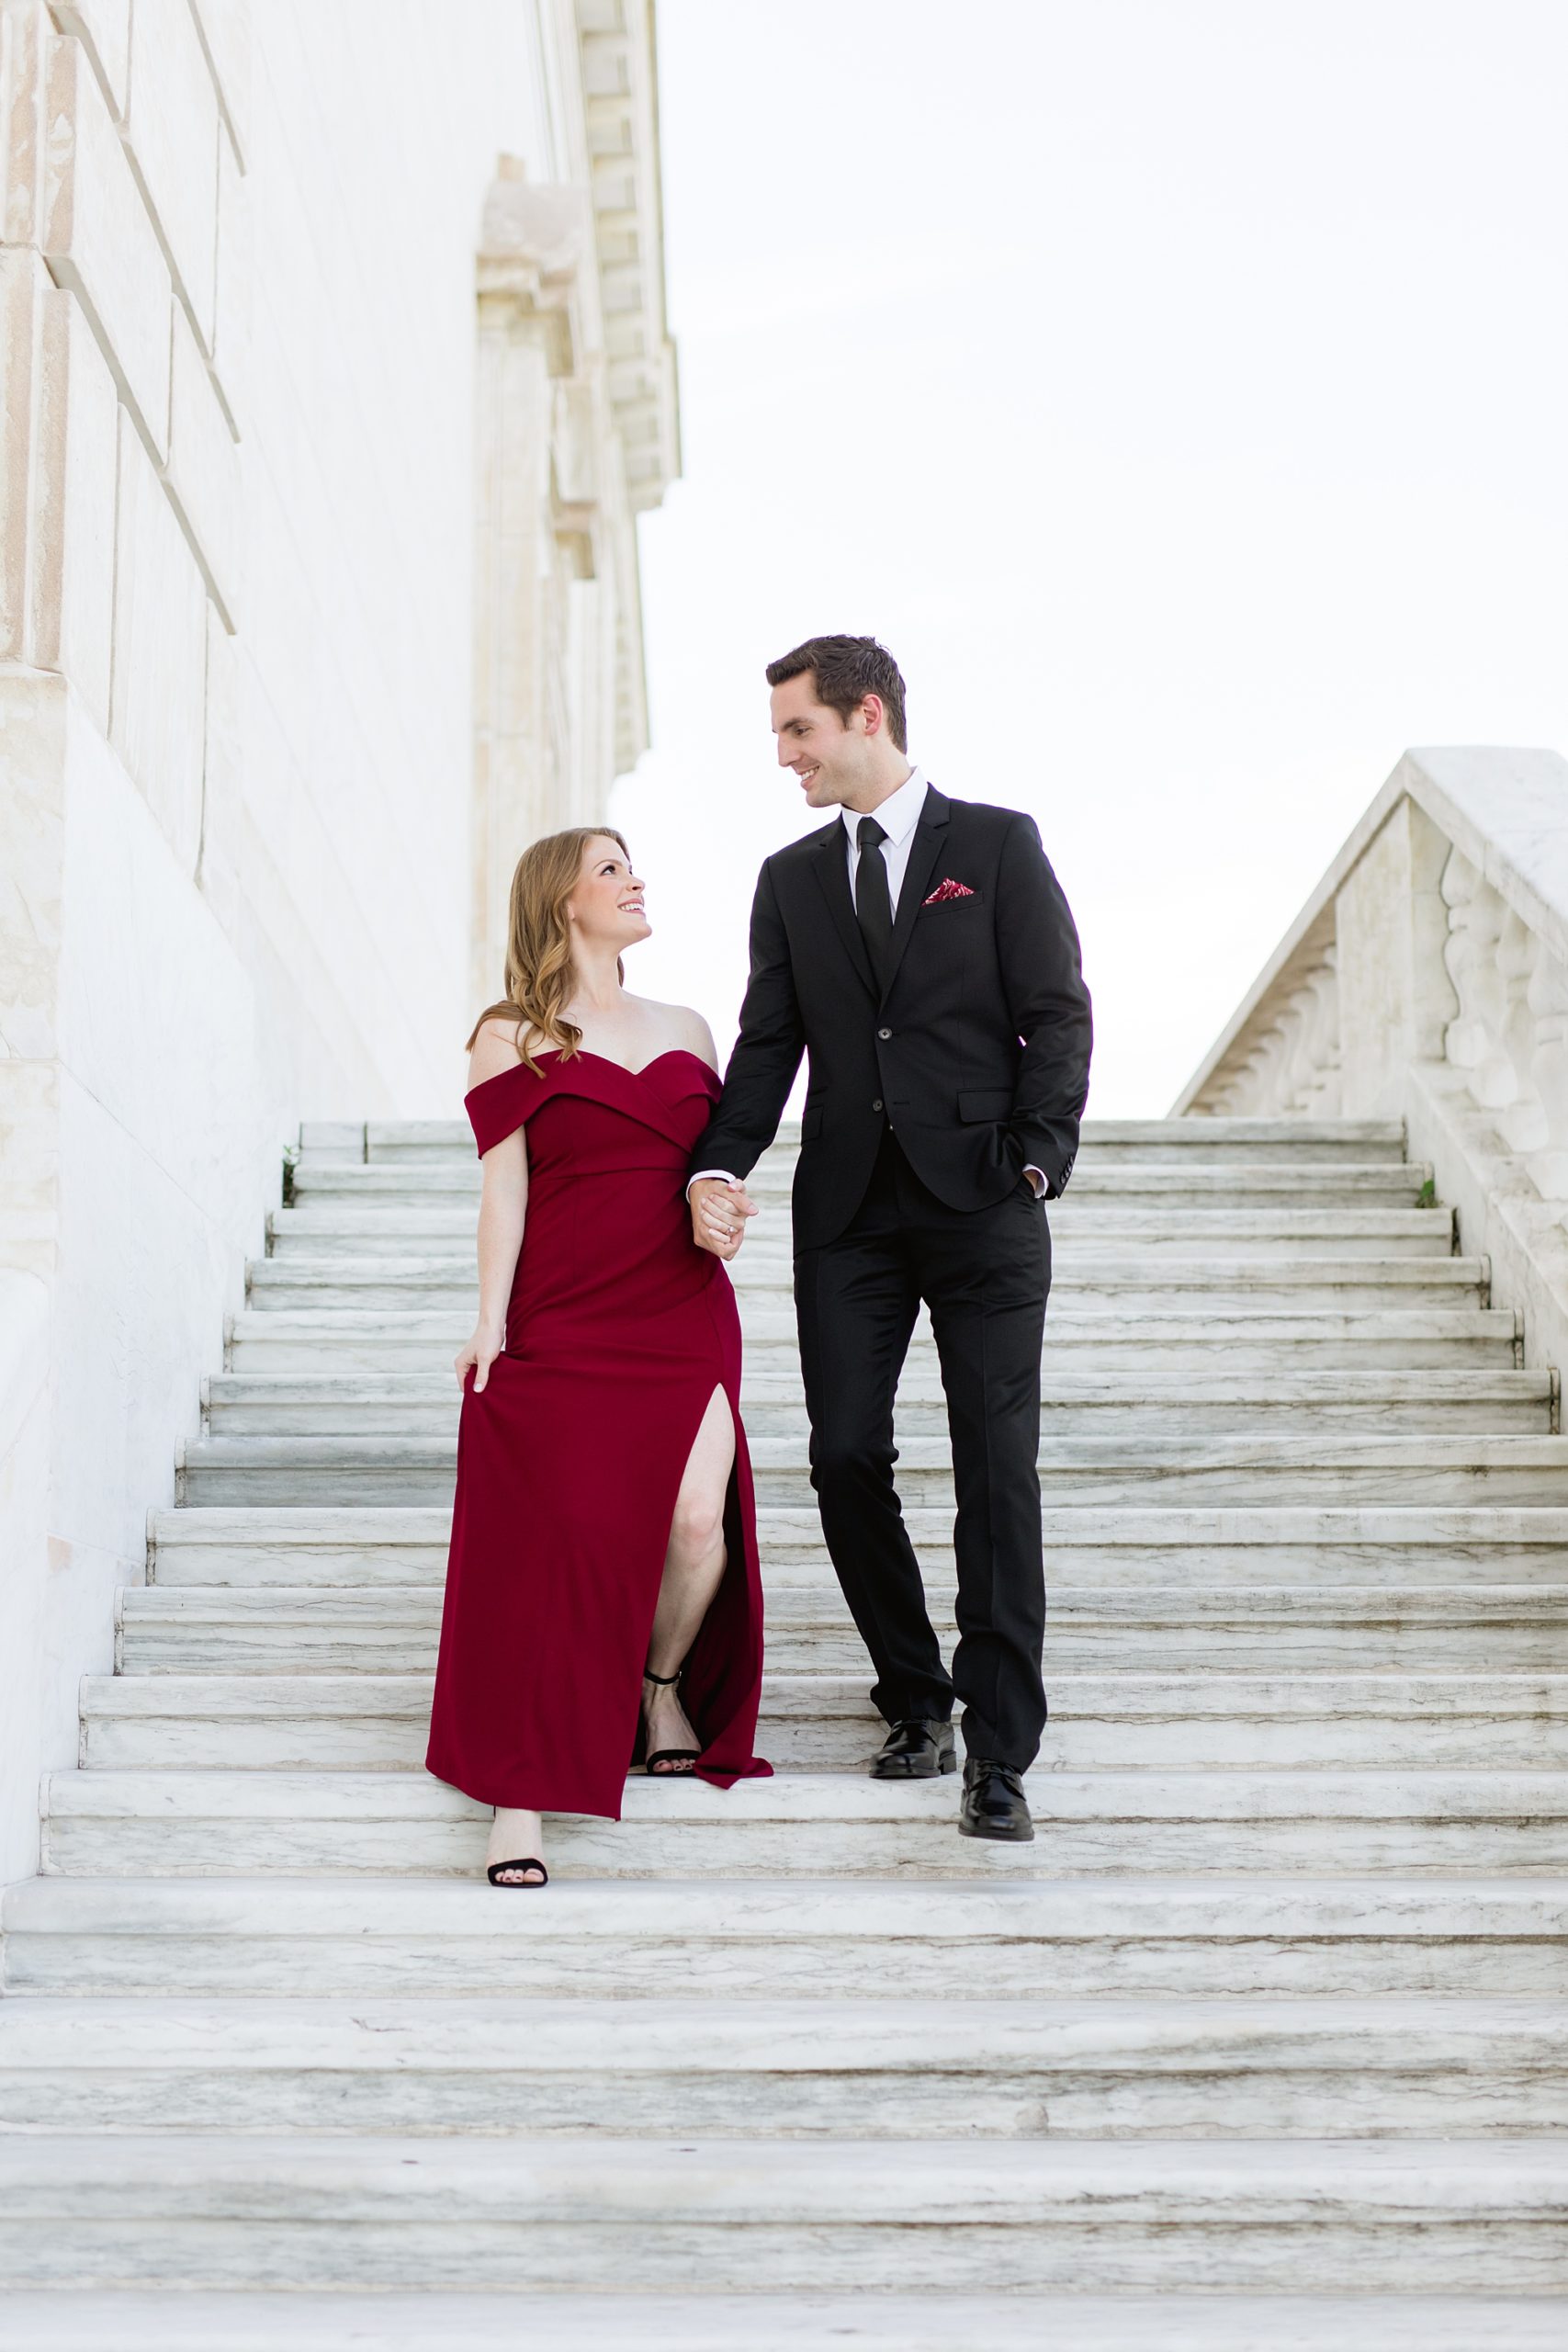 Formal wear engagement photos | Breanne Rochelle Photography